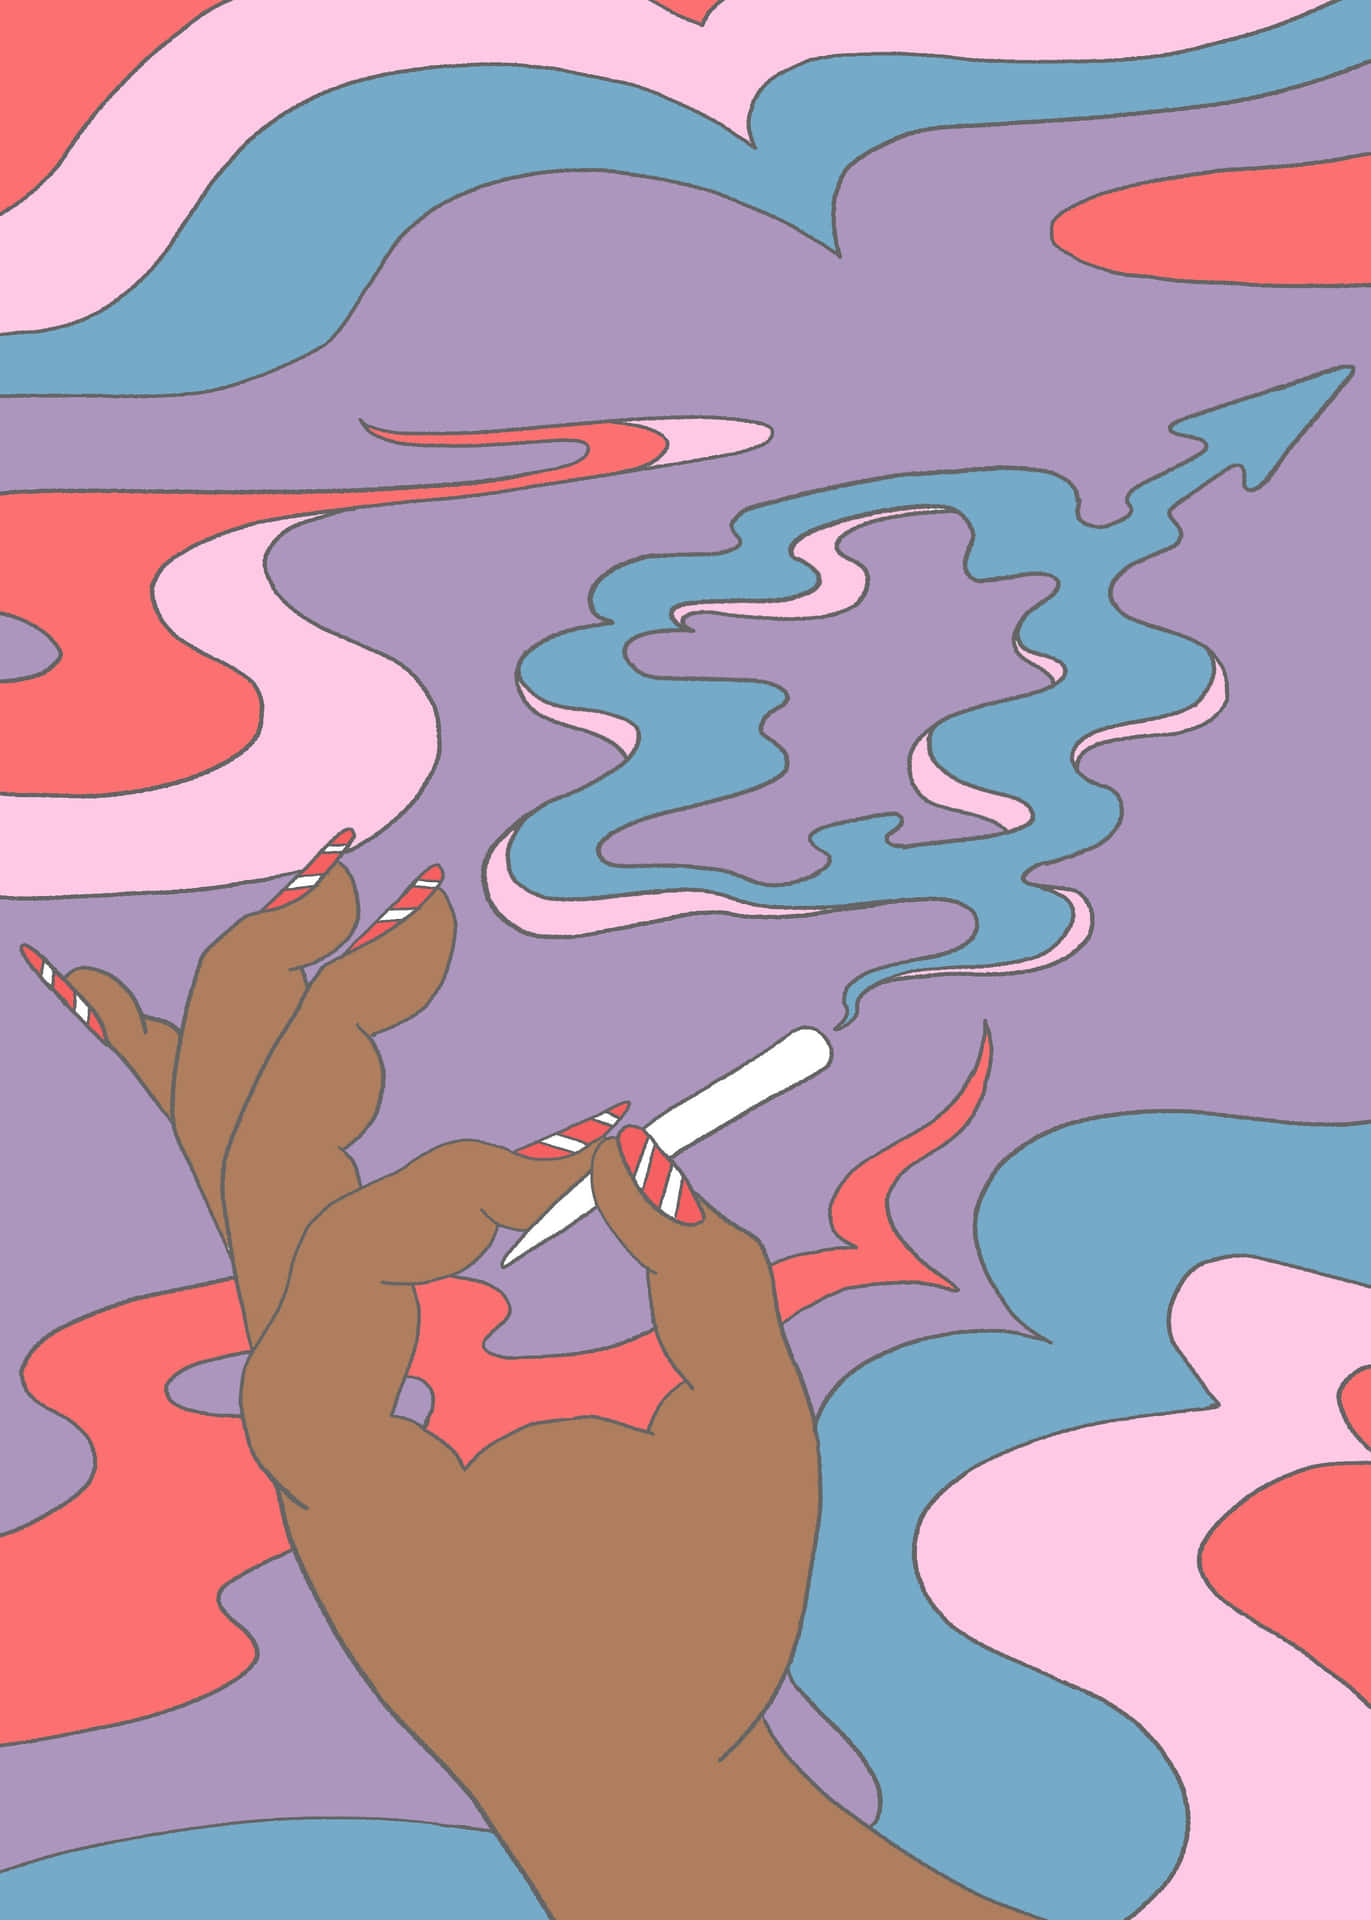 Enjoy the smooth, smoky flavor of a classic weed blunt Wallpaper